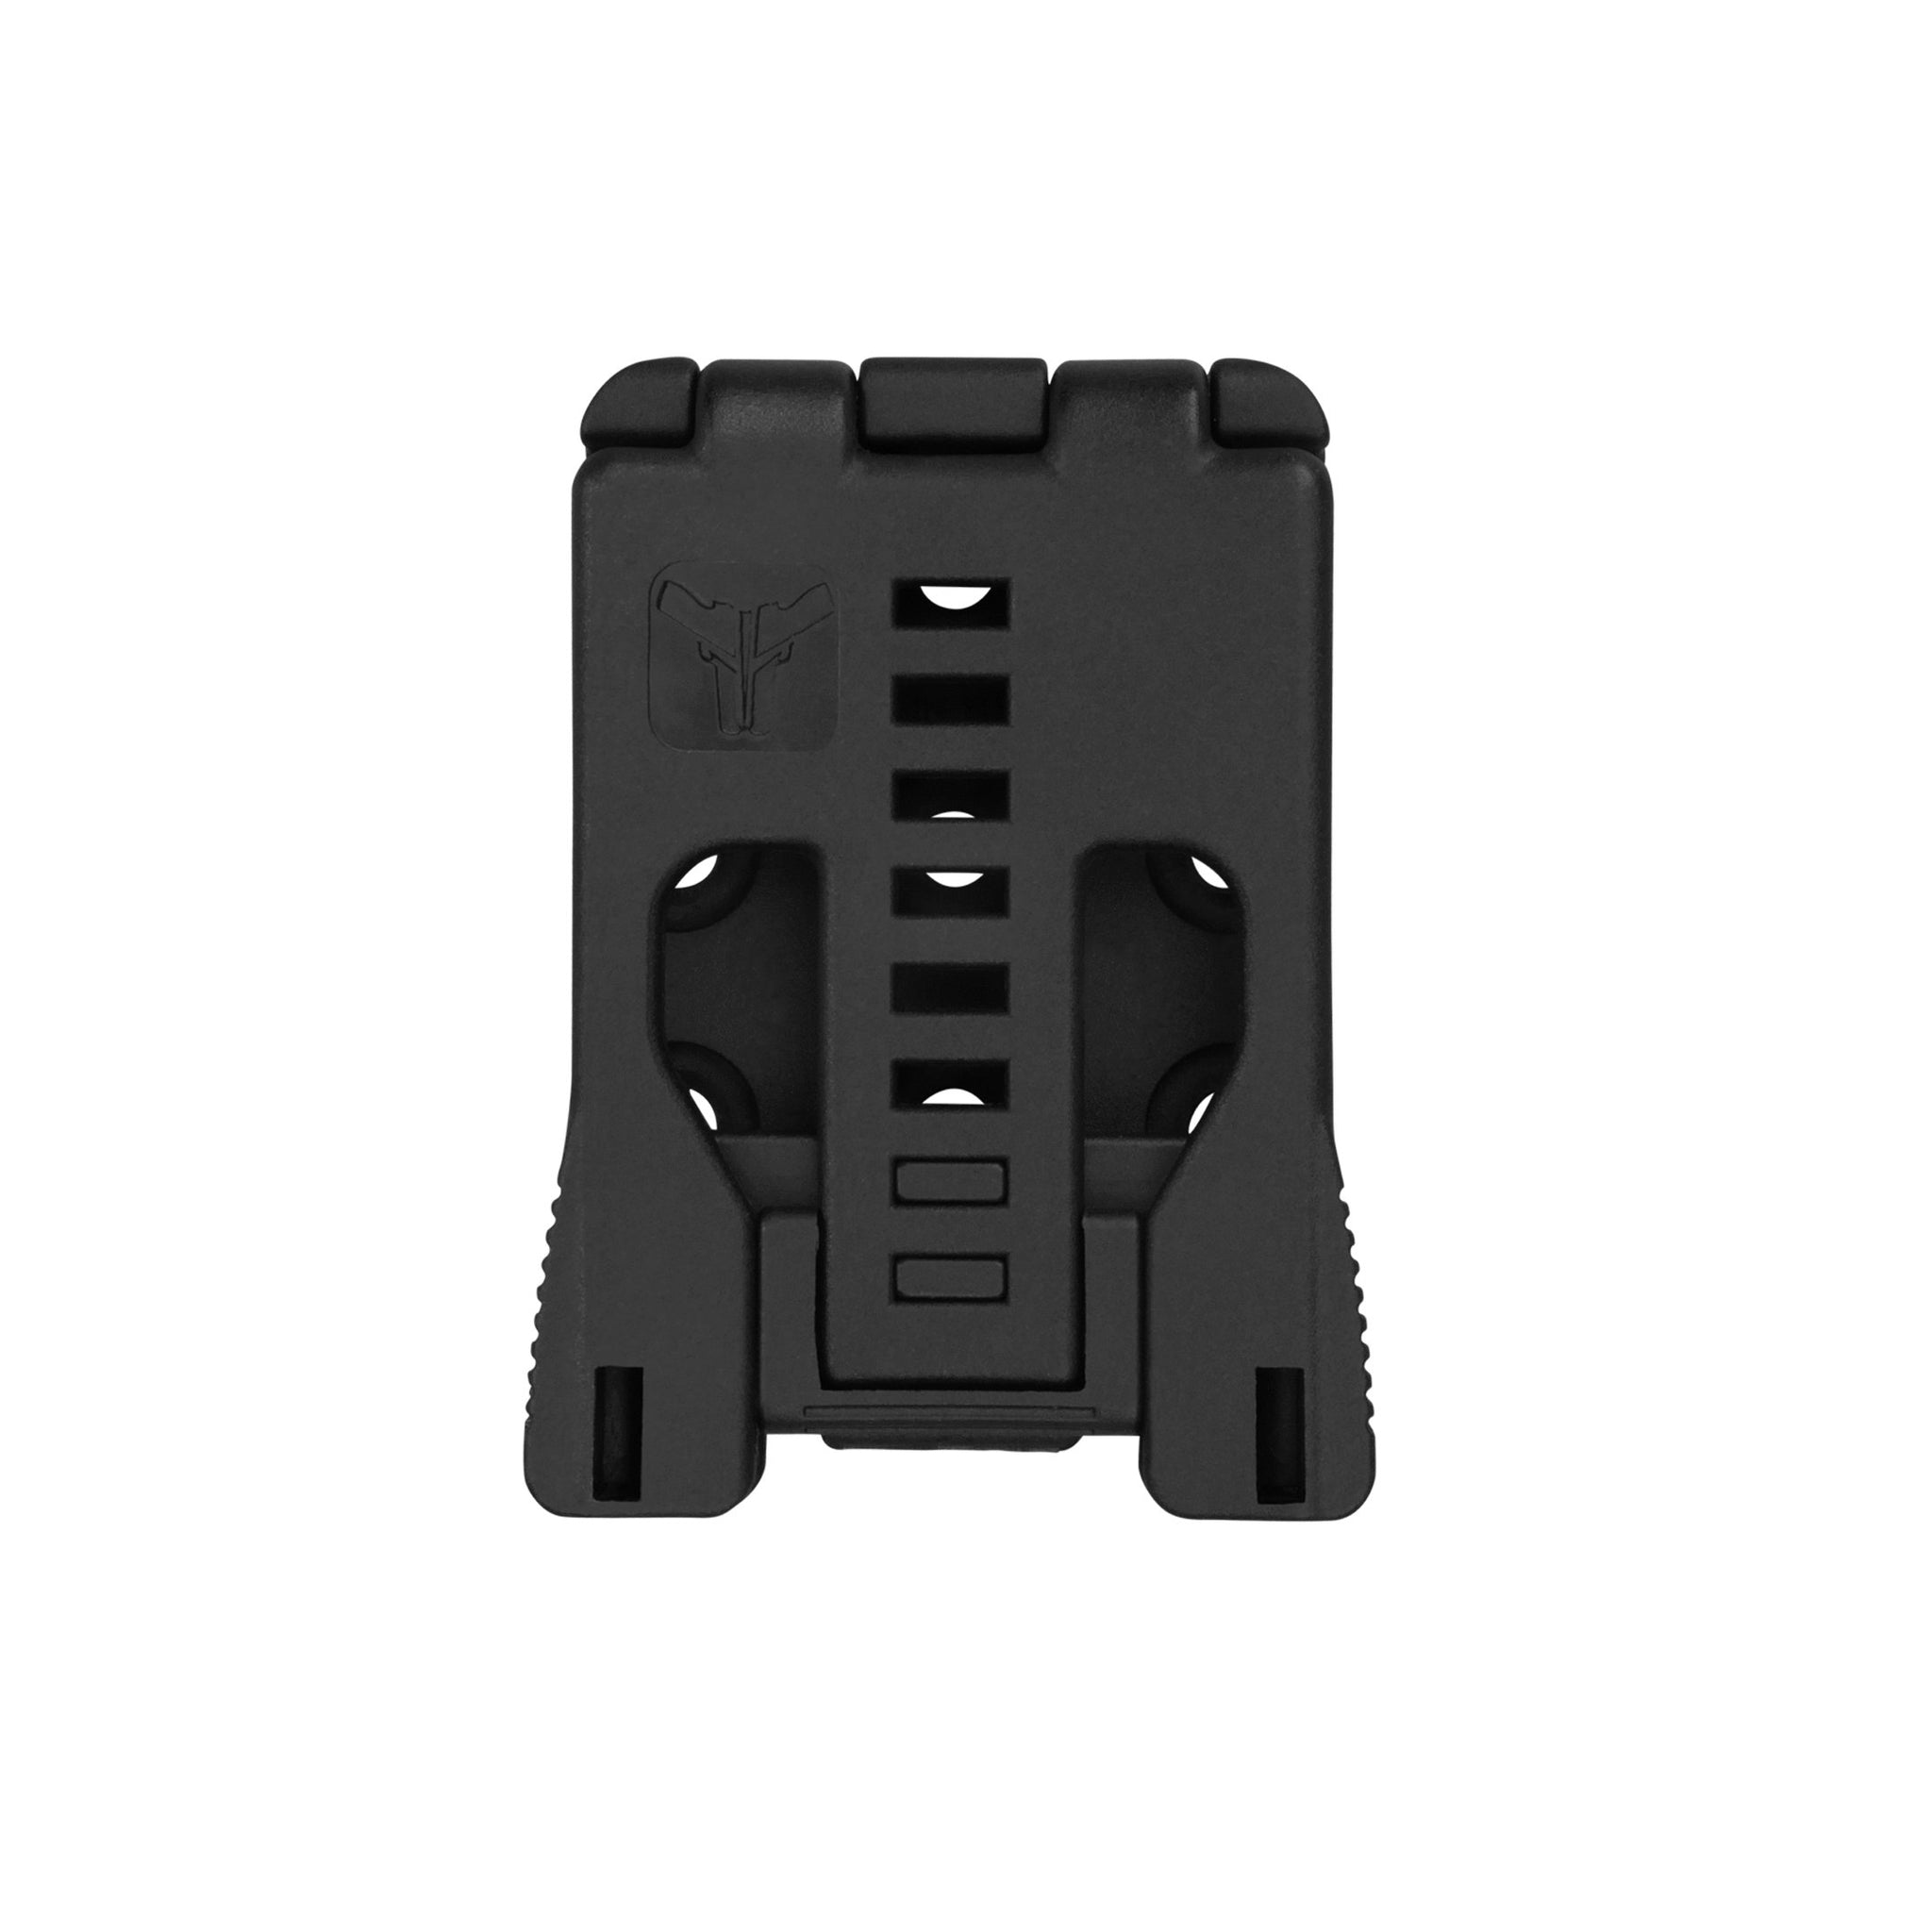 Blade Tech Tek-Lok Holster Mount Kydex Holsters and Mag Pouches